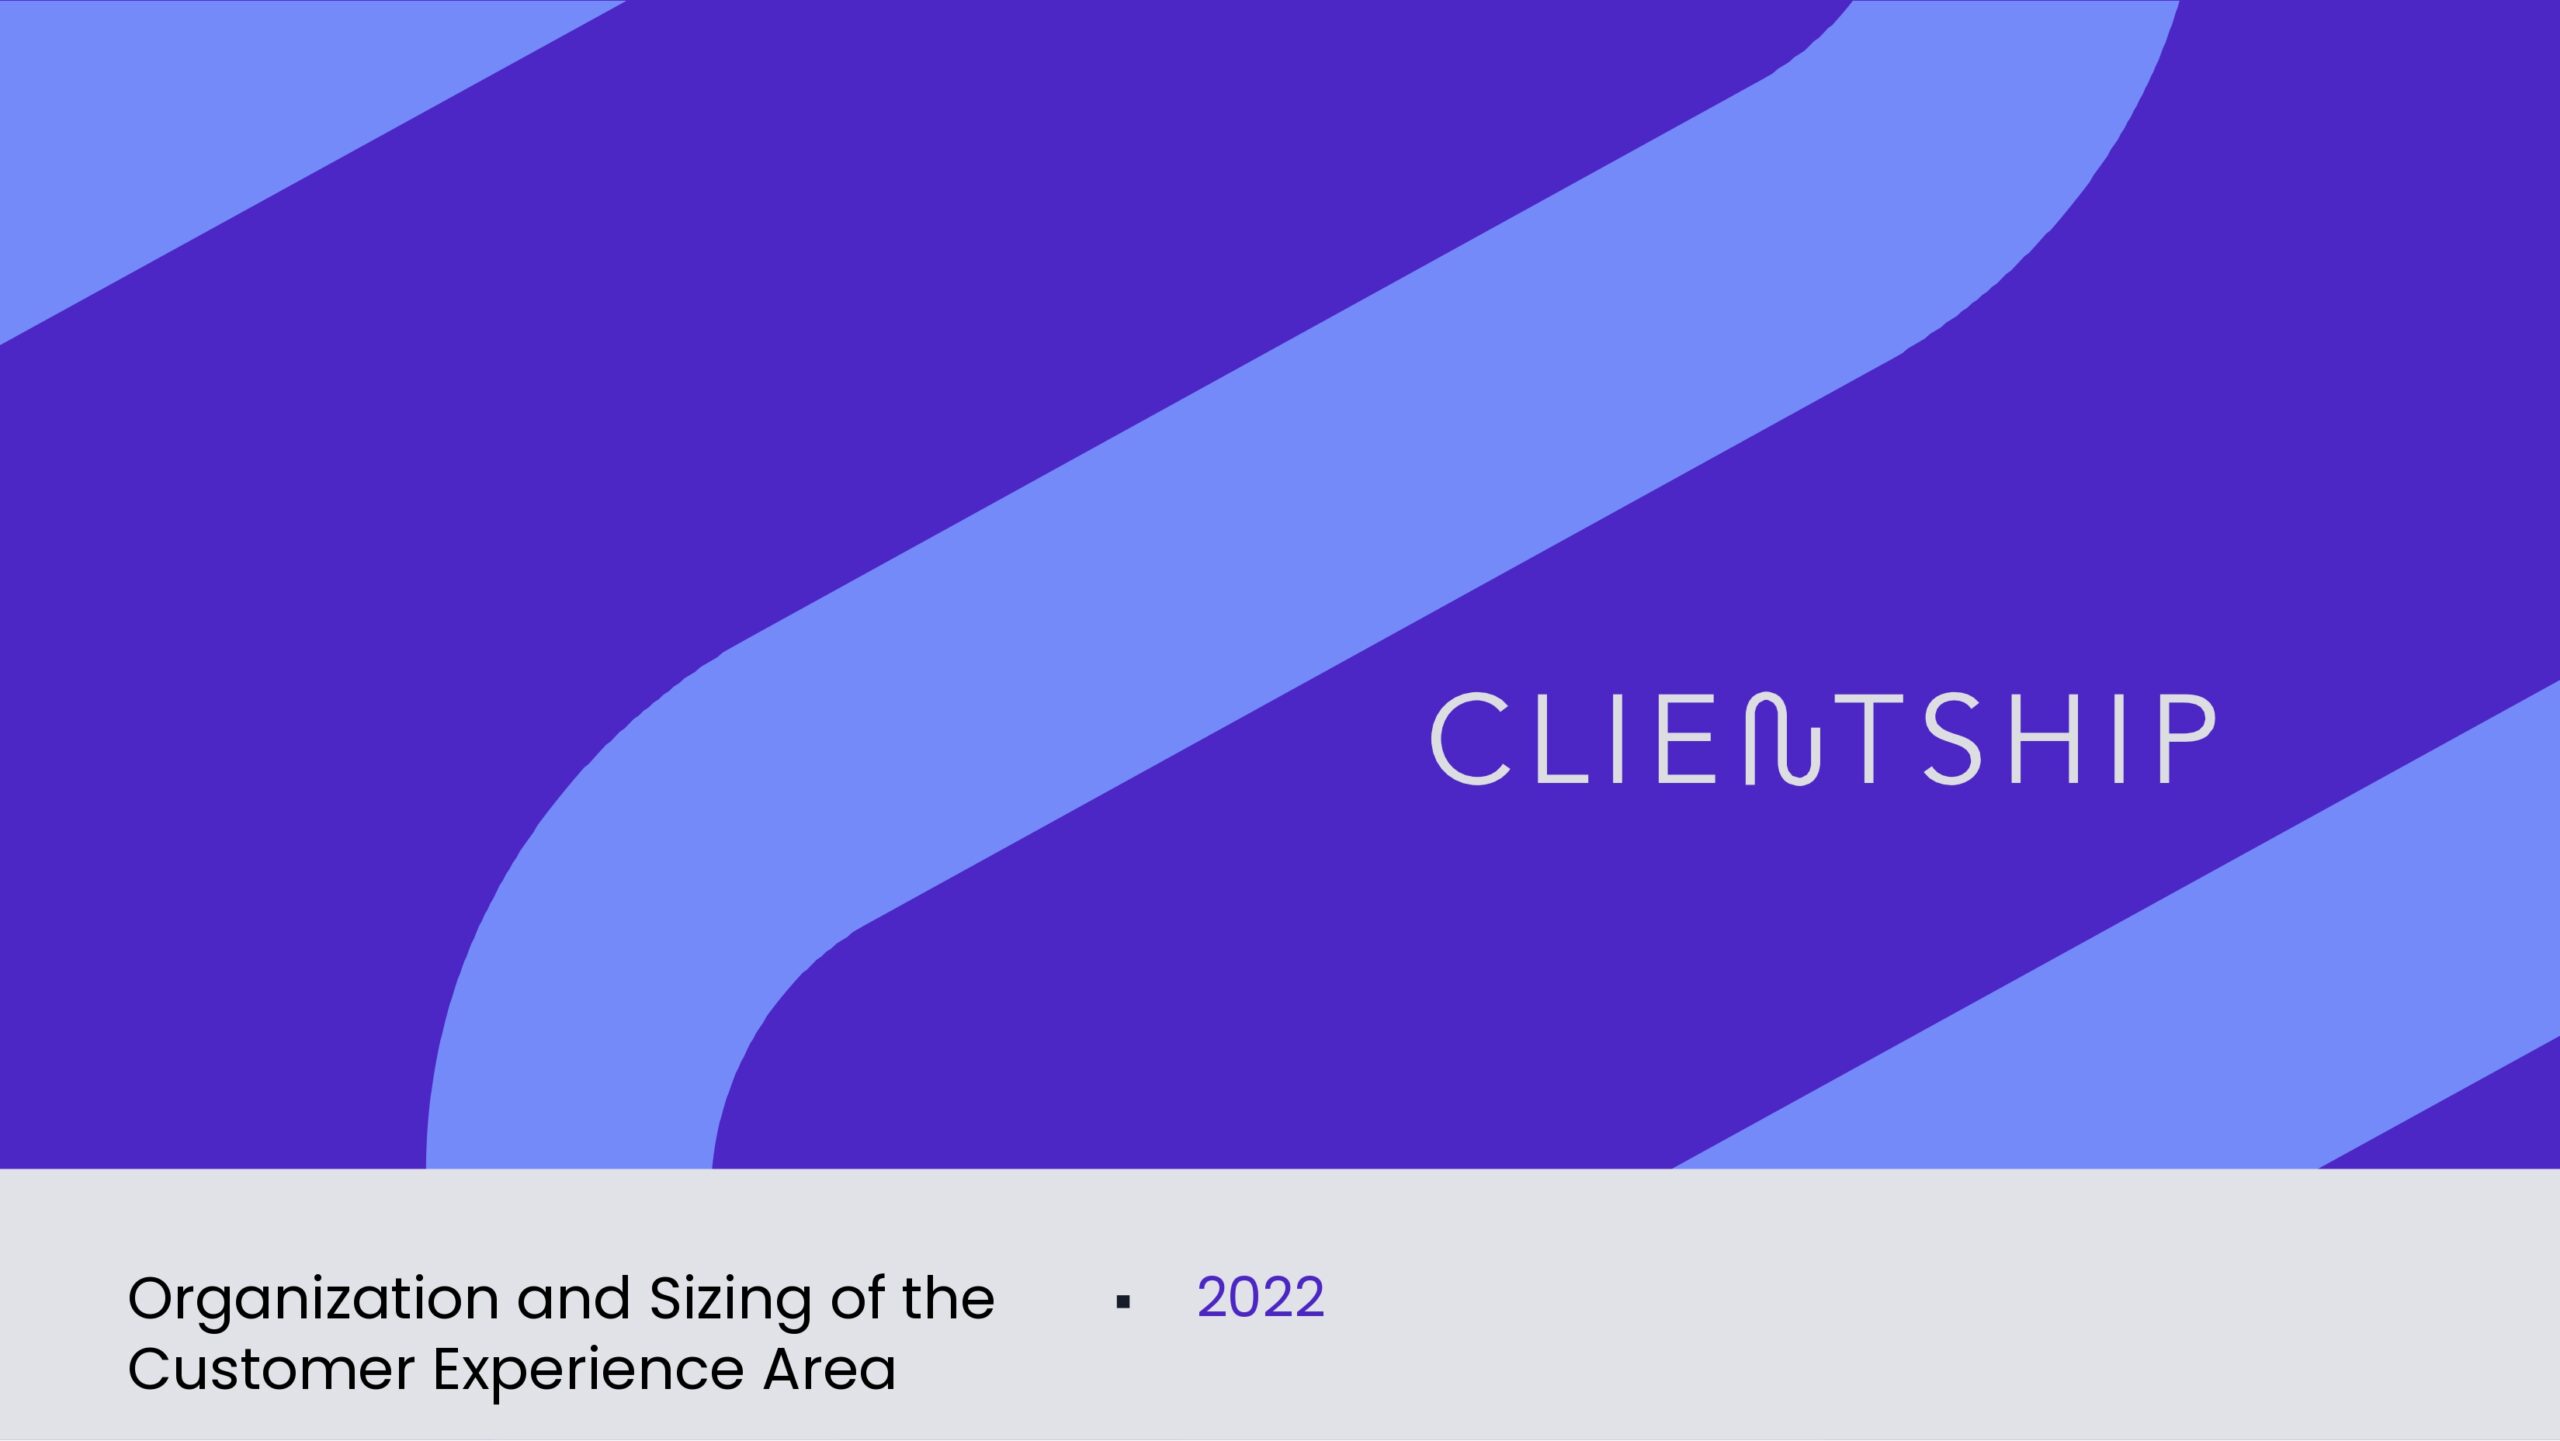 Clientship: Organization and Sizing of the 2022 Customer Experience Area